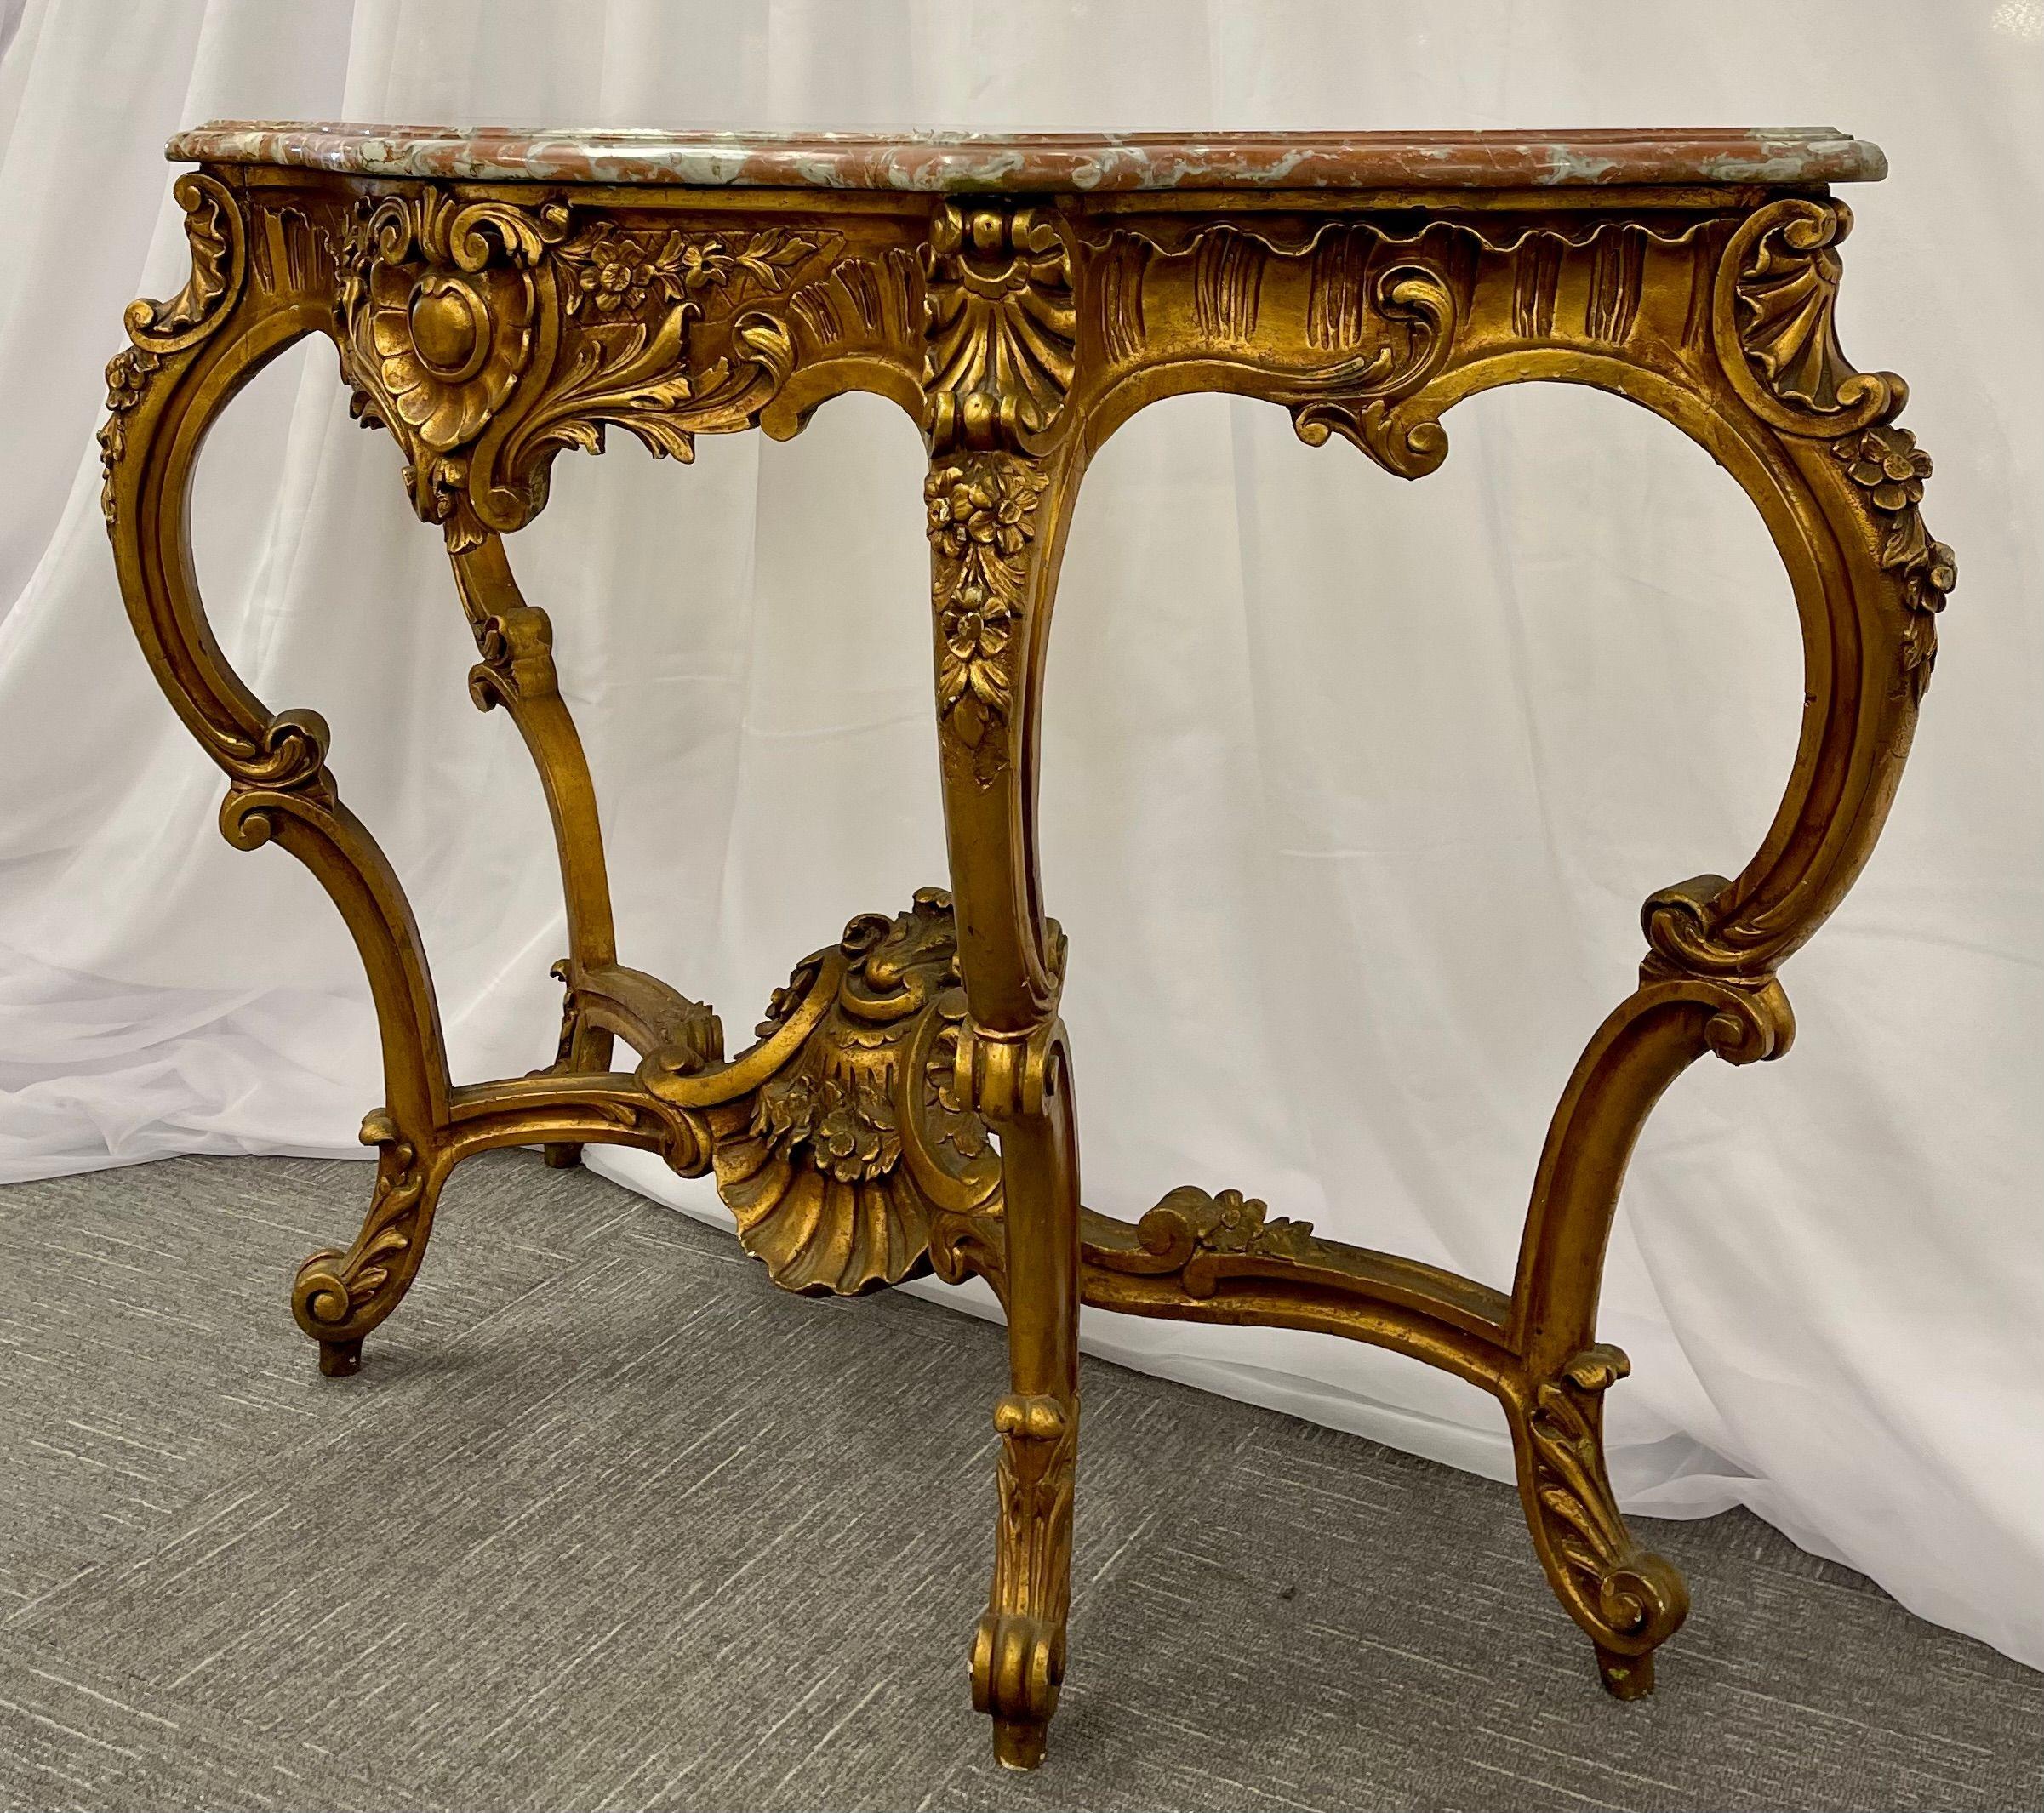 Marble-Top Louis XV Style Console Table by Jansen Exquisite Carved Details 1920s For Sale 1